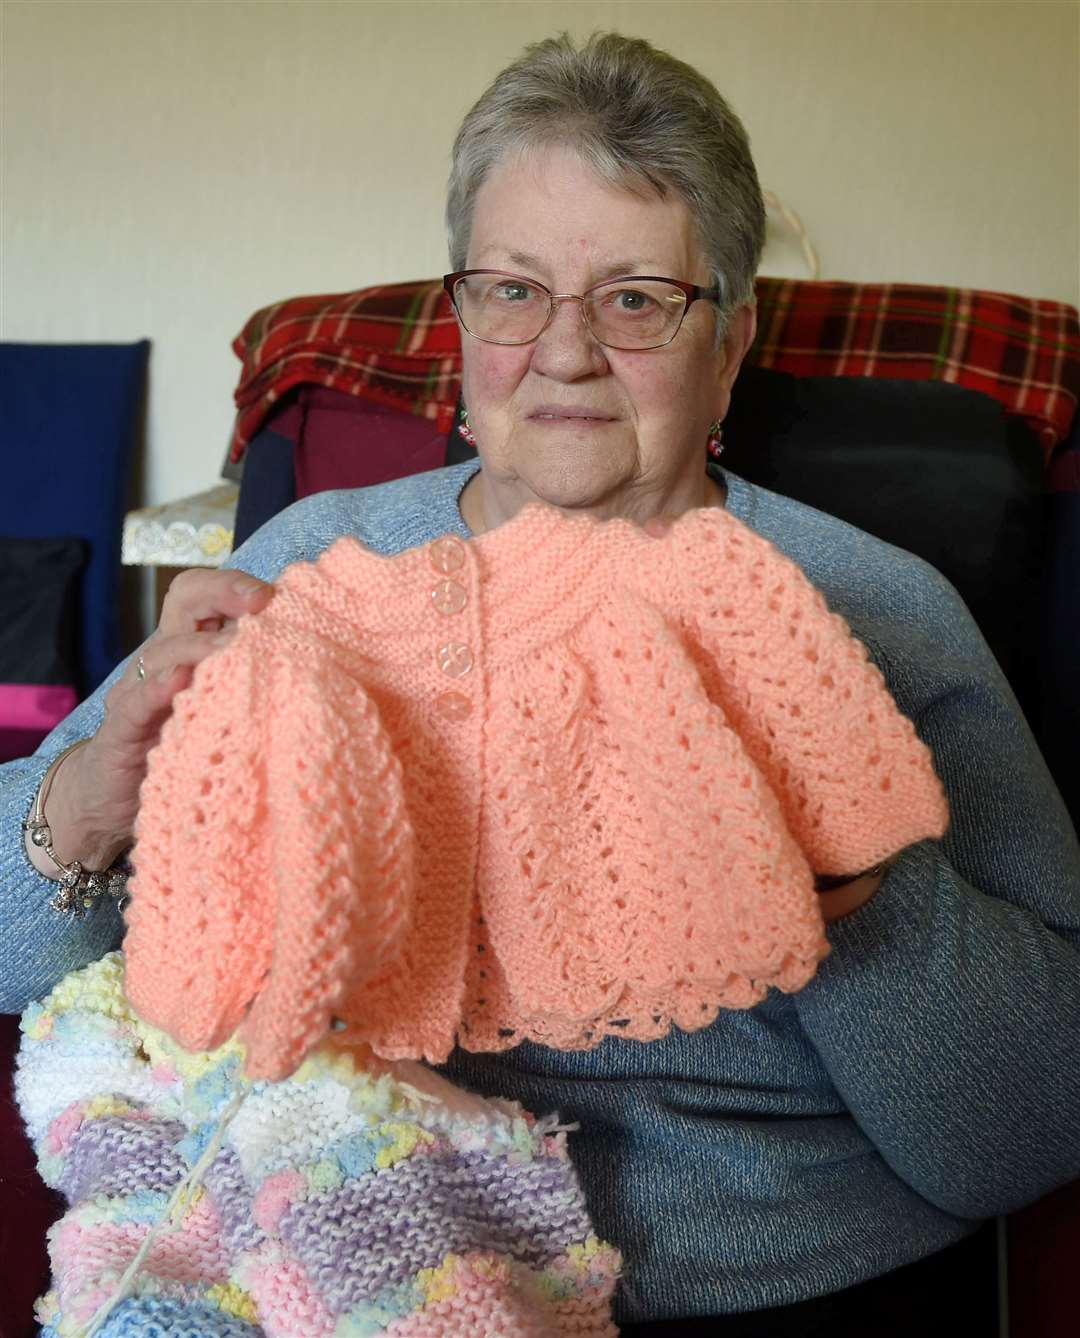 Marie MacIver knits clothing for premature babies.